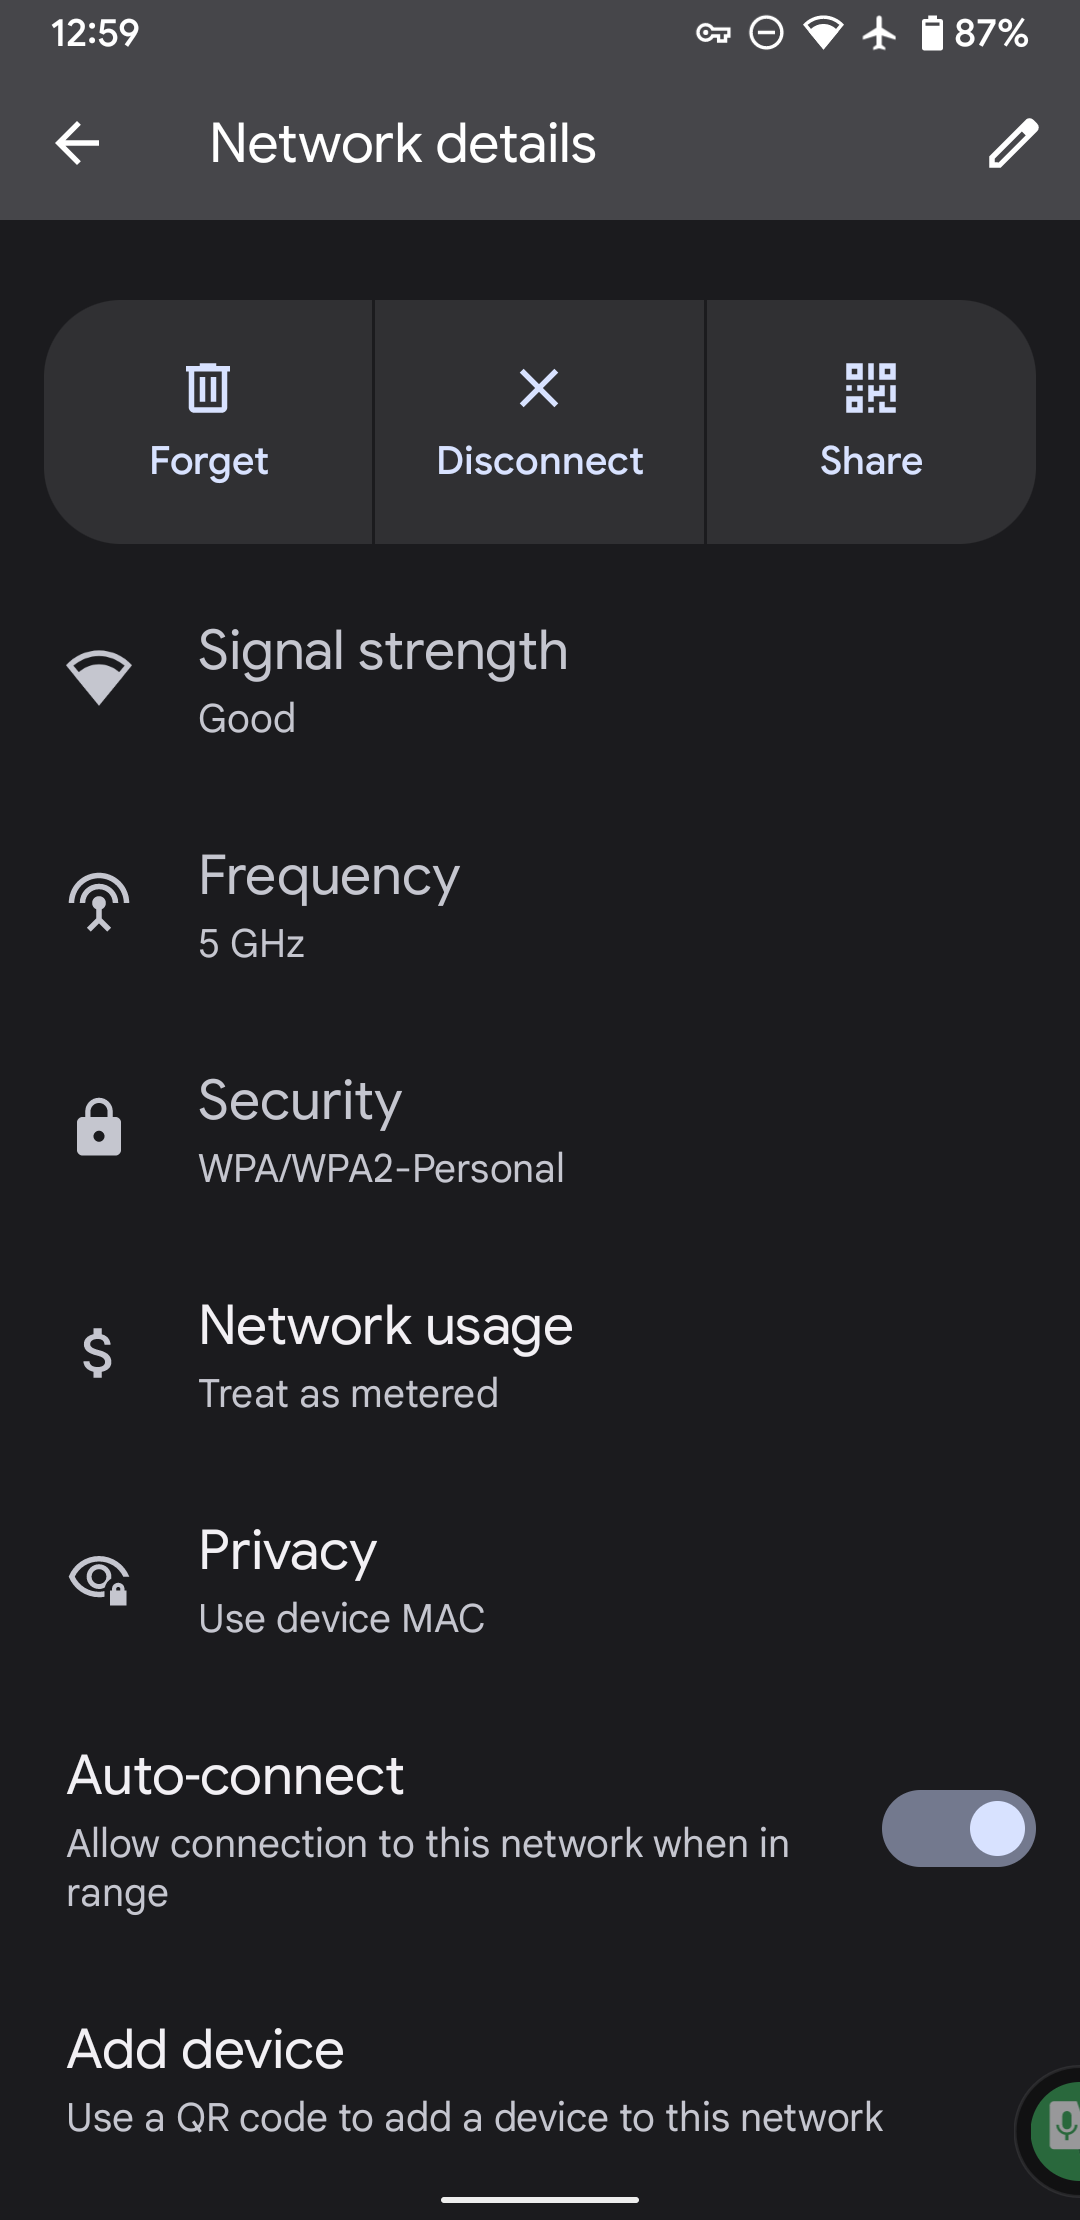 Android network settings with the 'Network usage' setting set to 'Treat as metered'.